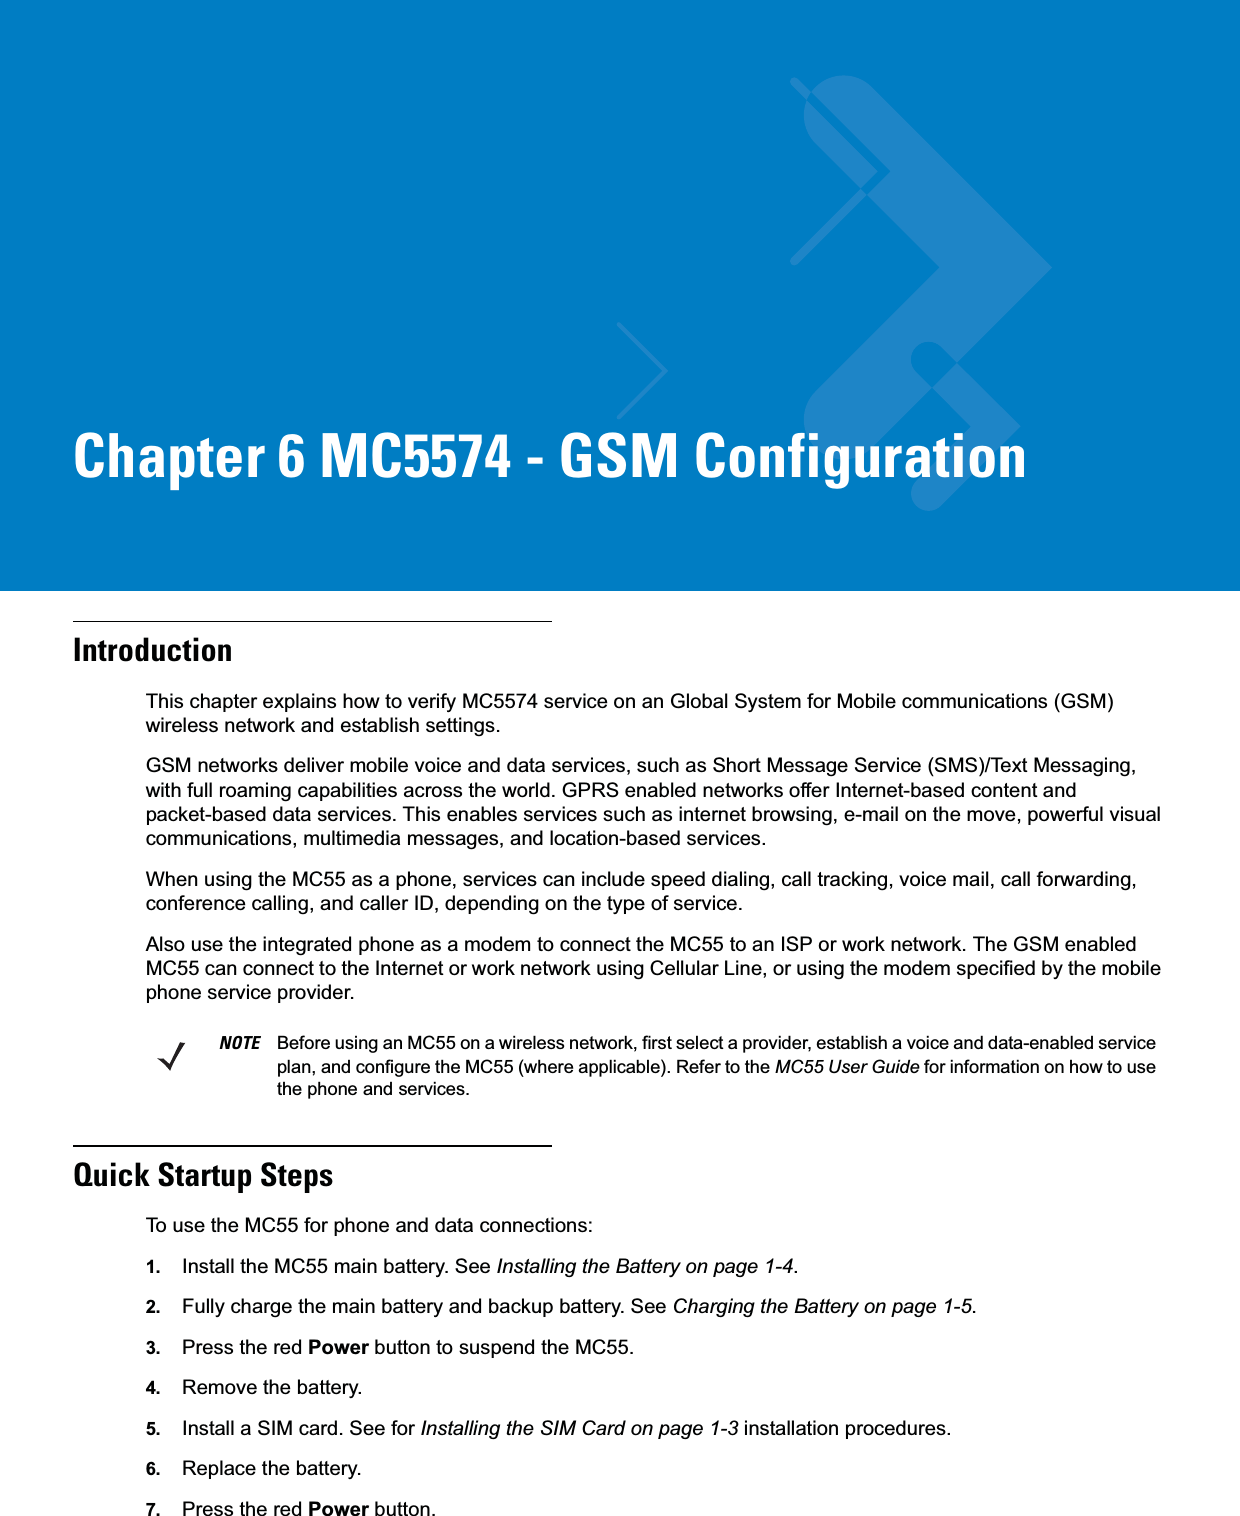 Chapter 6 MC5574 - GSM ConfigurationIntroductionThis chapter explains how to verify MC5574 service on an Global System for Mobile communications (GSM) wireless network and establish settings.GSM networks deliver mobile voice and data services, such as Short Message Service (SMS)/Text Messaging, with full roaming capabilities across the world. GPRS enabled networks offer Internet-based content and packet-based data services. This enables services such as internet browsing, e-mail on the move, powerful visual communications, multimedia messages, and location-based services.When using the MC55 as a phone, services can include speed dialing, call tracking, voice mail, call forwarding, conference calling, and caller ID, depending on the type of service.Also use the integrated phone as a modem to connect the MC55 to an ISP or work network. The GSM enabled MC55 can connect to the Internet or work network using Cellular Line, or using the modem specified by the mobile phone service provider.Quick Startup StepsTo use the MC55 for phone and data connections:1. Install the MC55 main battery. See Installing the Battery on page 1-4.2. Fully charge the main battery and backup battery. See Charging the Battery on page 1-5.3. Press the red Power button to suspend the MC55.4. Remove the battery.5. Install a SIM card. See for Installing the SIM Card on page 1-3 installation procedures.6. Replace the battery.7. Press the red Power button.NOTE Before using an MC55 on a wireless network, first select a provider, establish a voice and data-enabled service plan, and configure the MC55 (where applicable). Refer to the MC55 User Guide for information on how to use the phone and services.